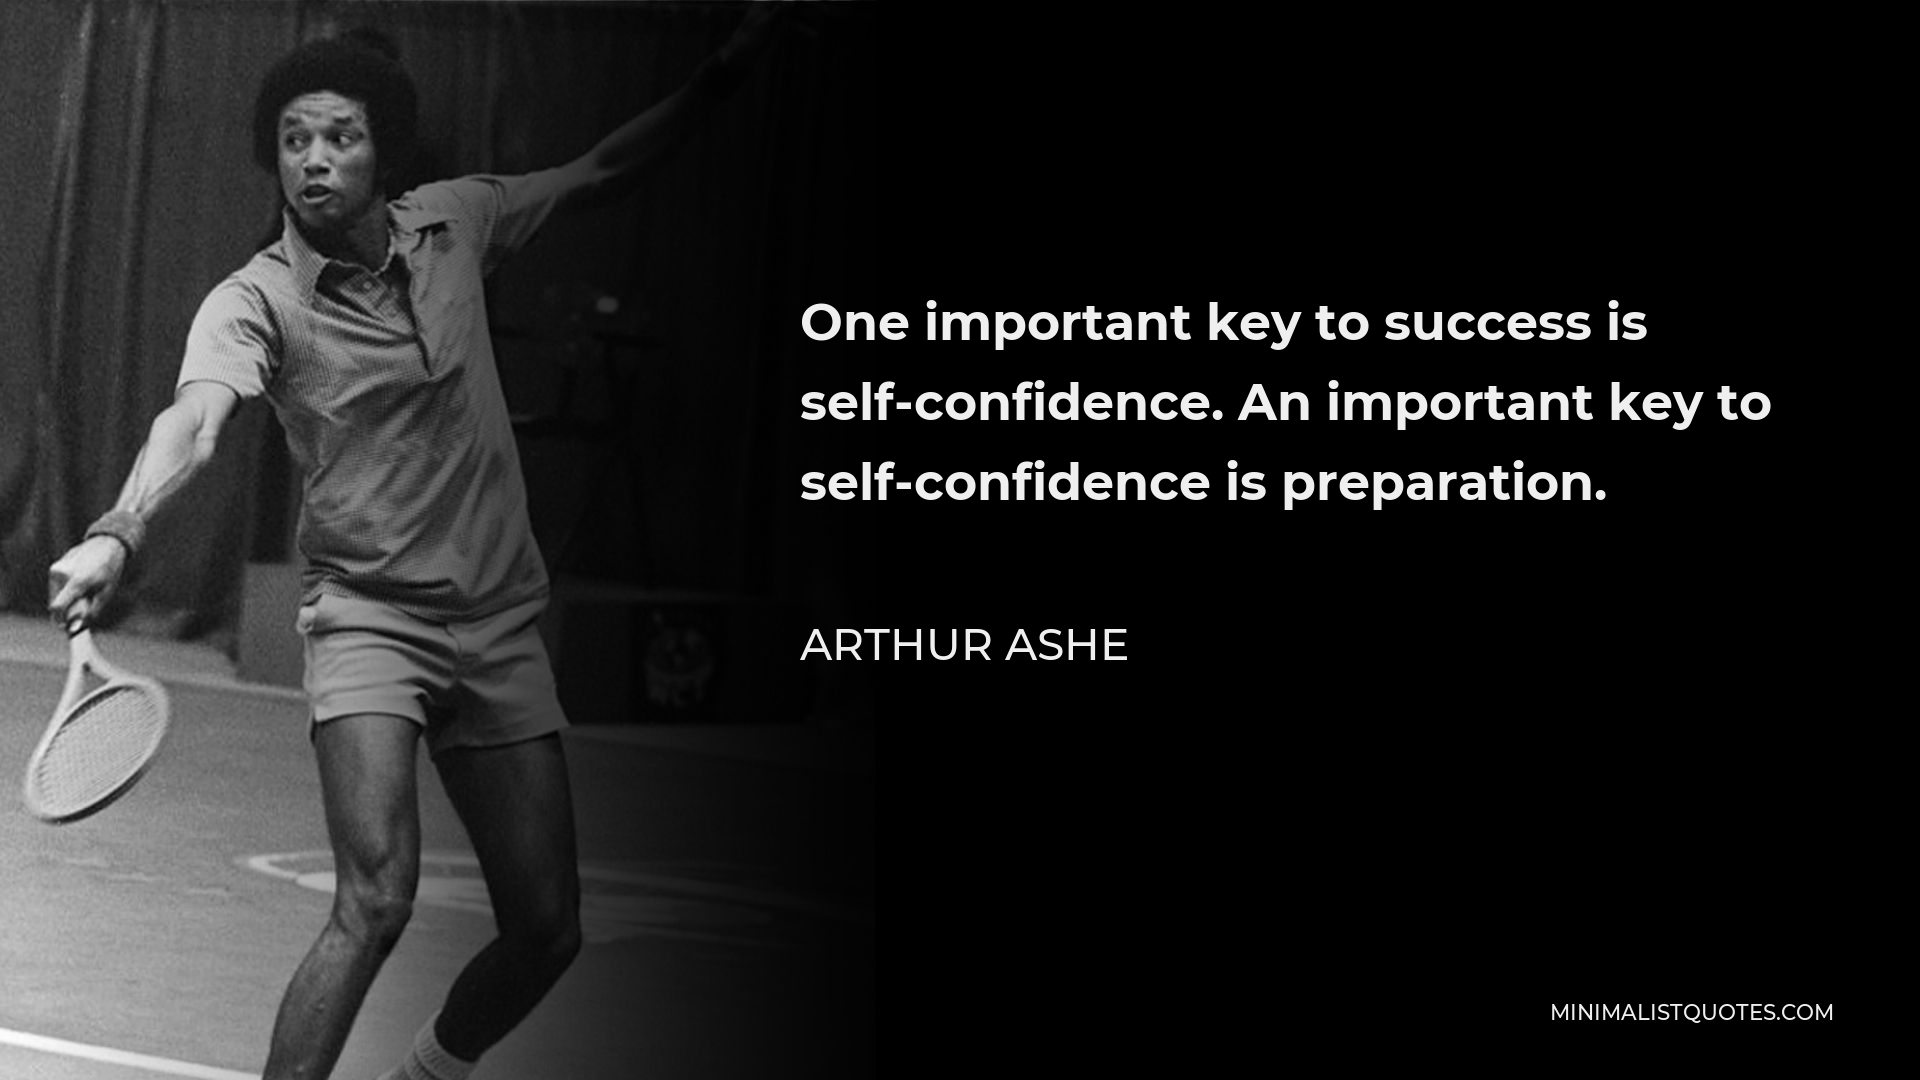 Arthur Ashe Quote - One important key to success is self-confidence. An important key to self-confidence is preparation.